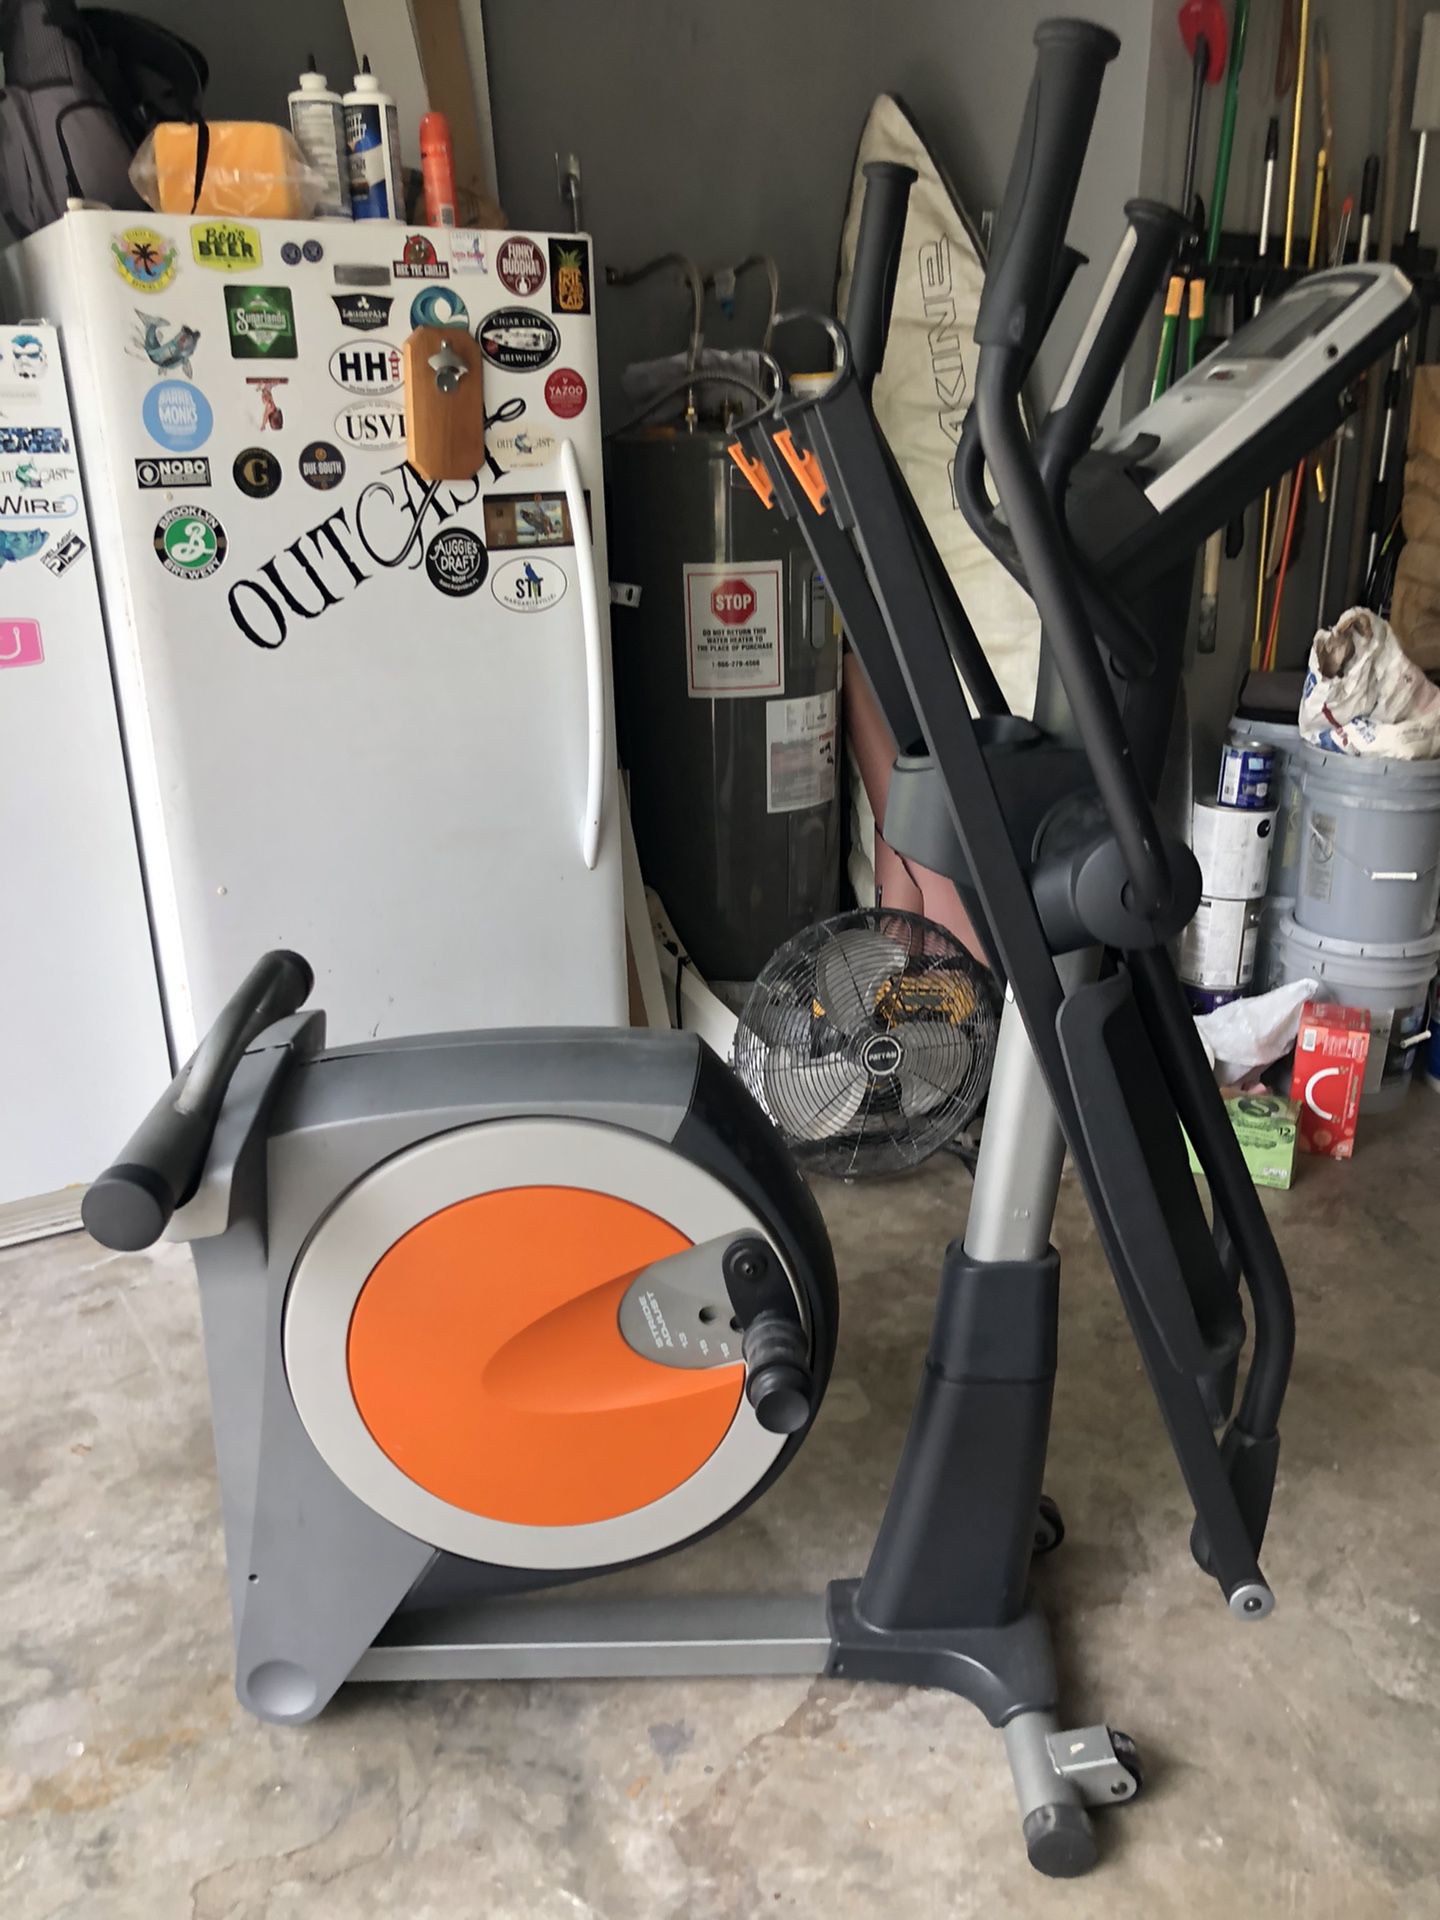 NordicTrack Collapsable Elliptical